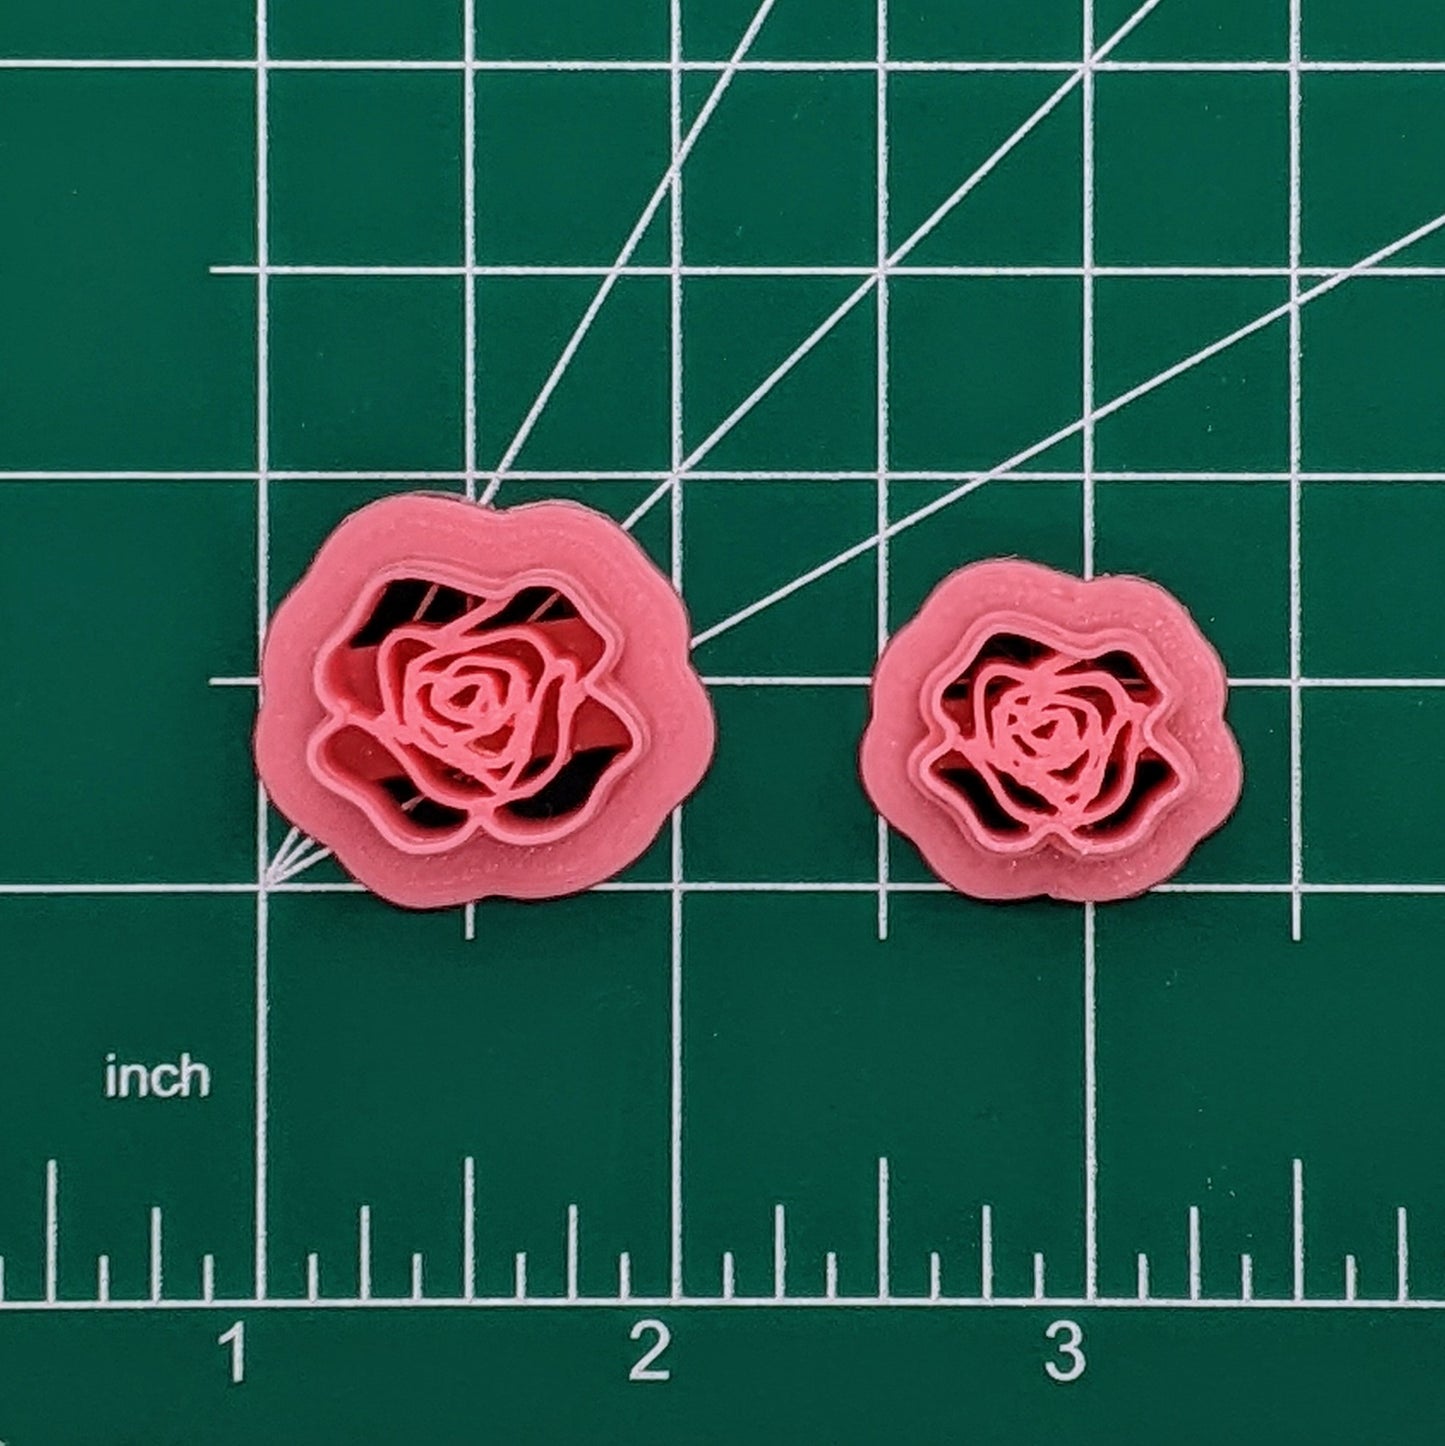 Rose Flower Cookie Cutter: Versatile Tool for Ceramics, Pottery, Cookies, Polymer Clay & More